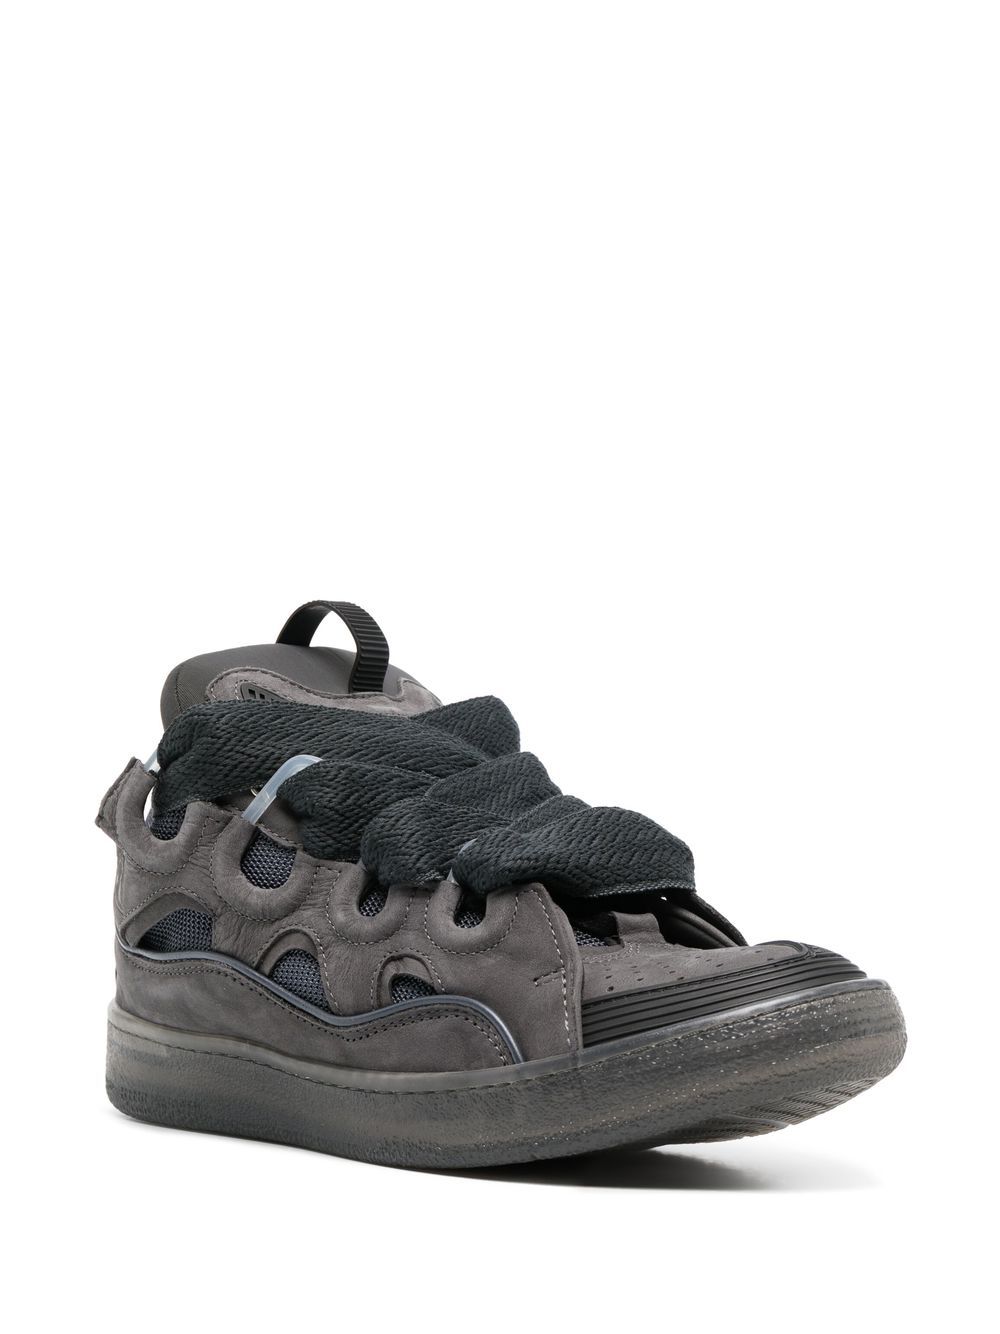 lanvin curb lace-up sneakers - black